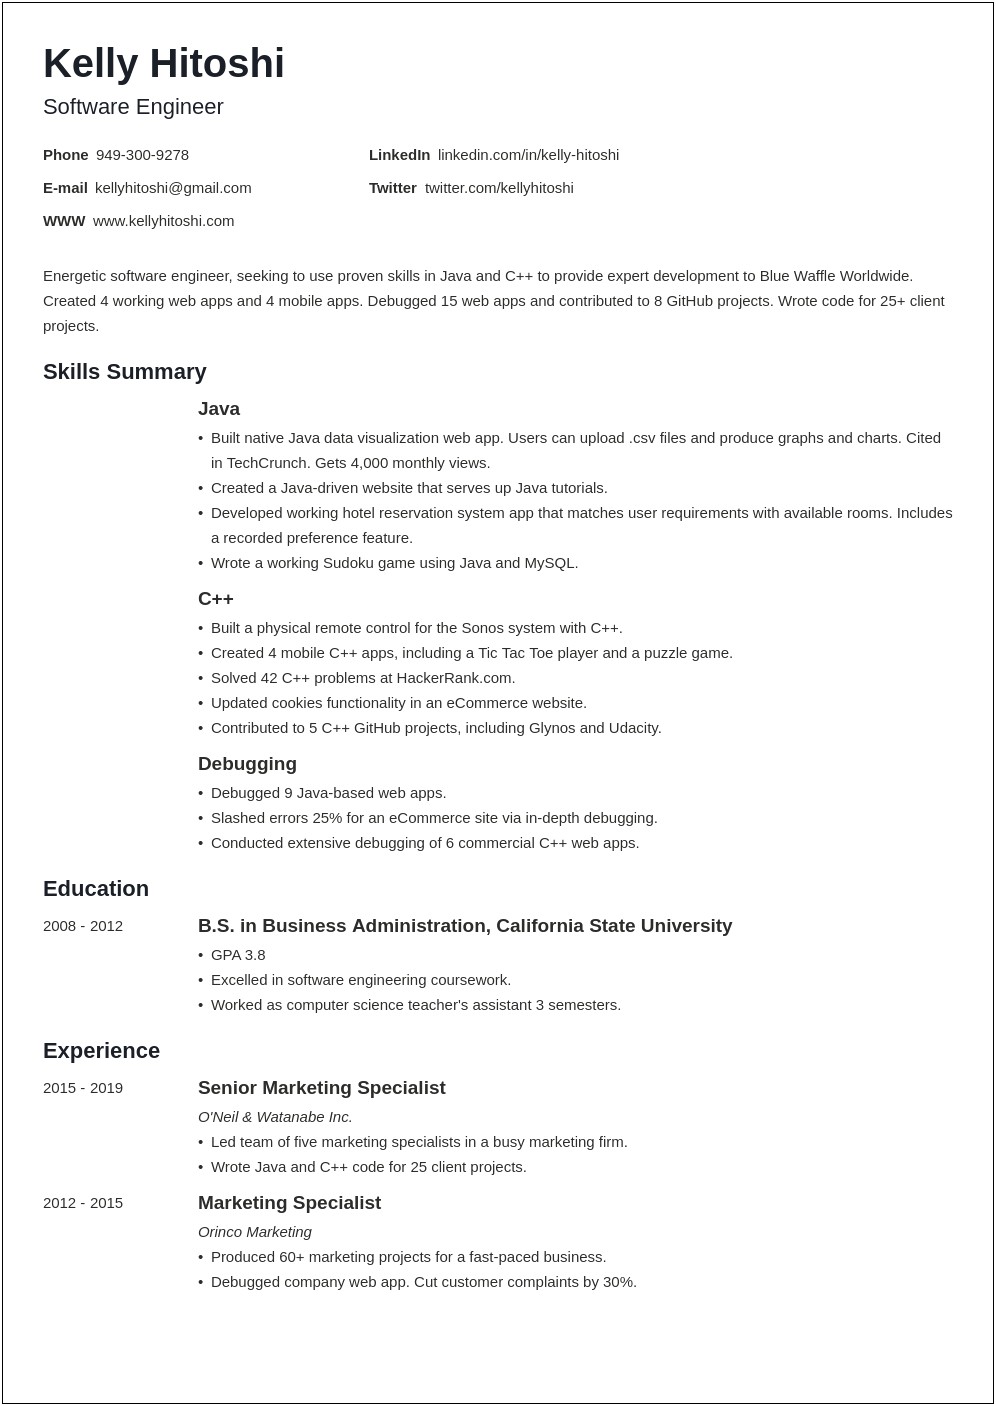 Examples Of Technology Skills On A Remote Resumes